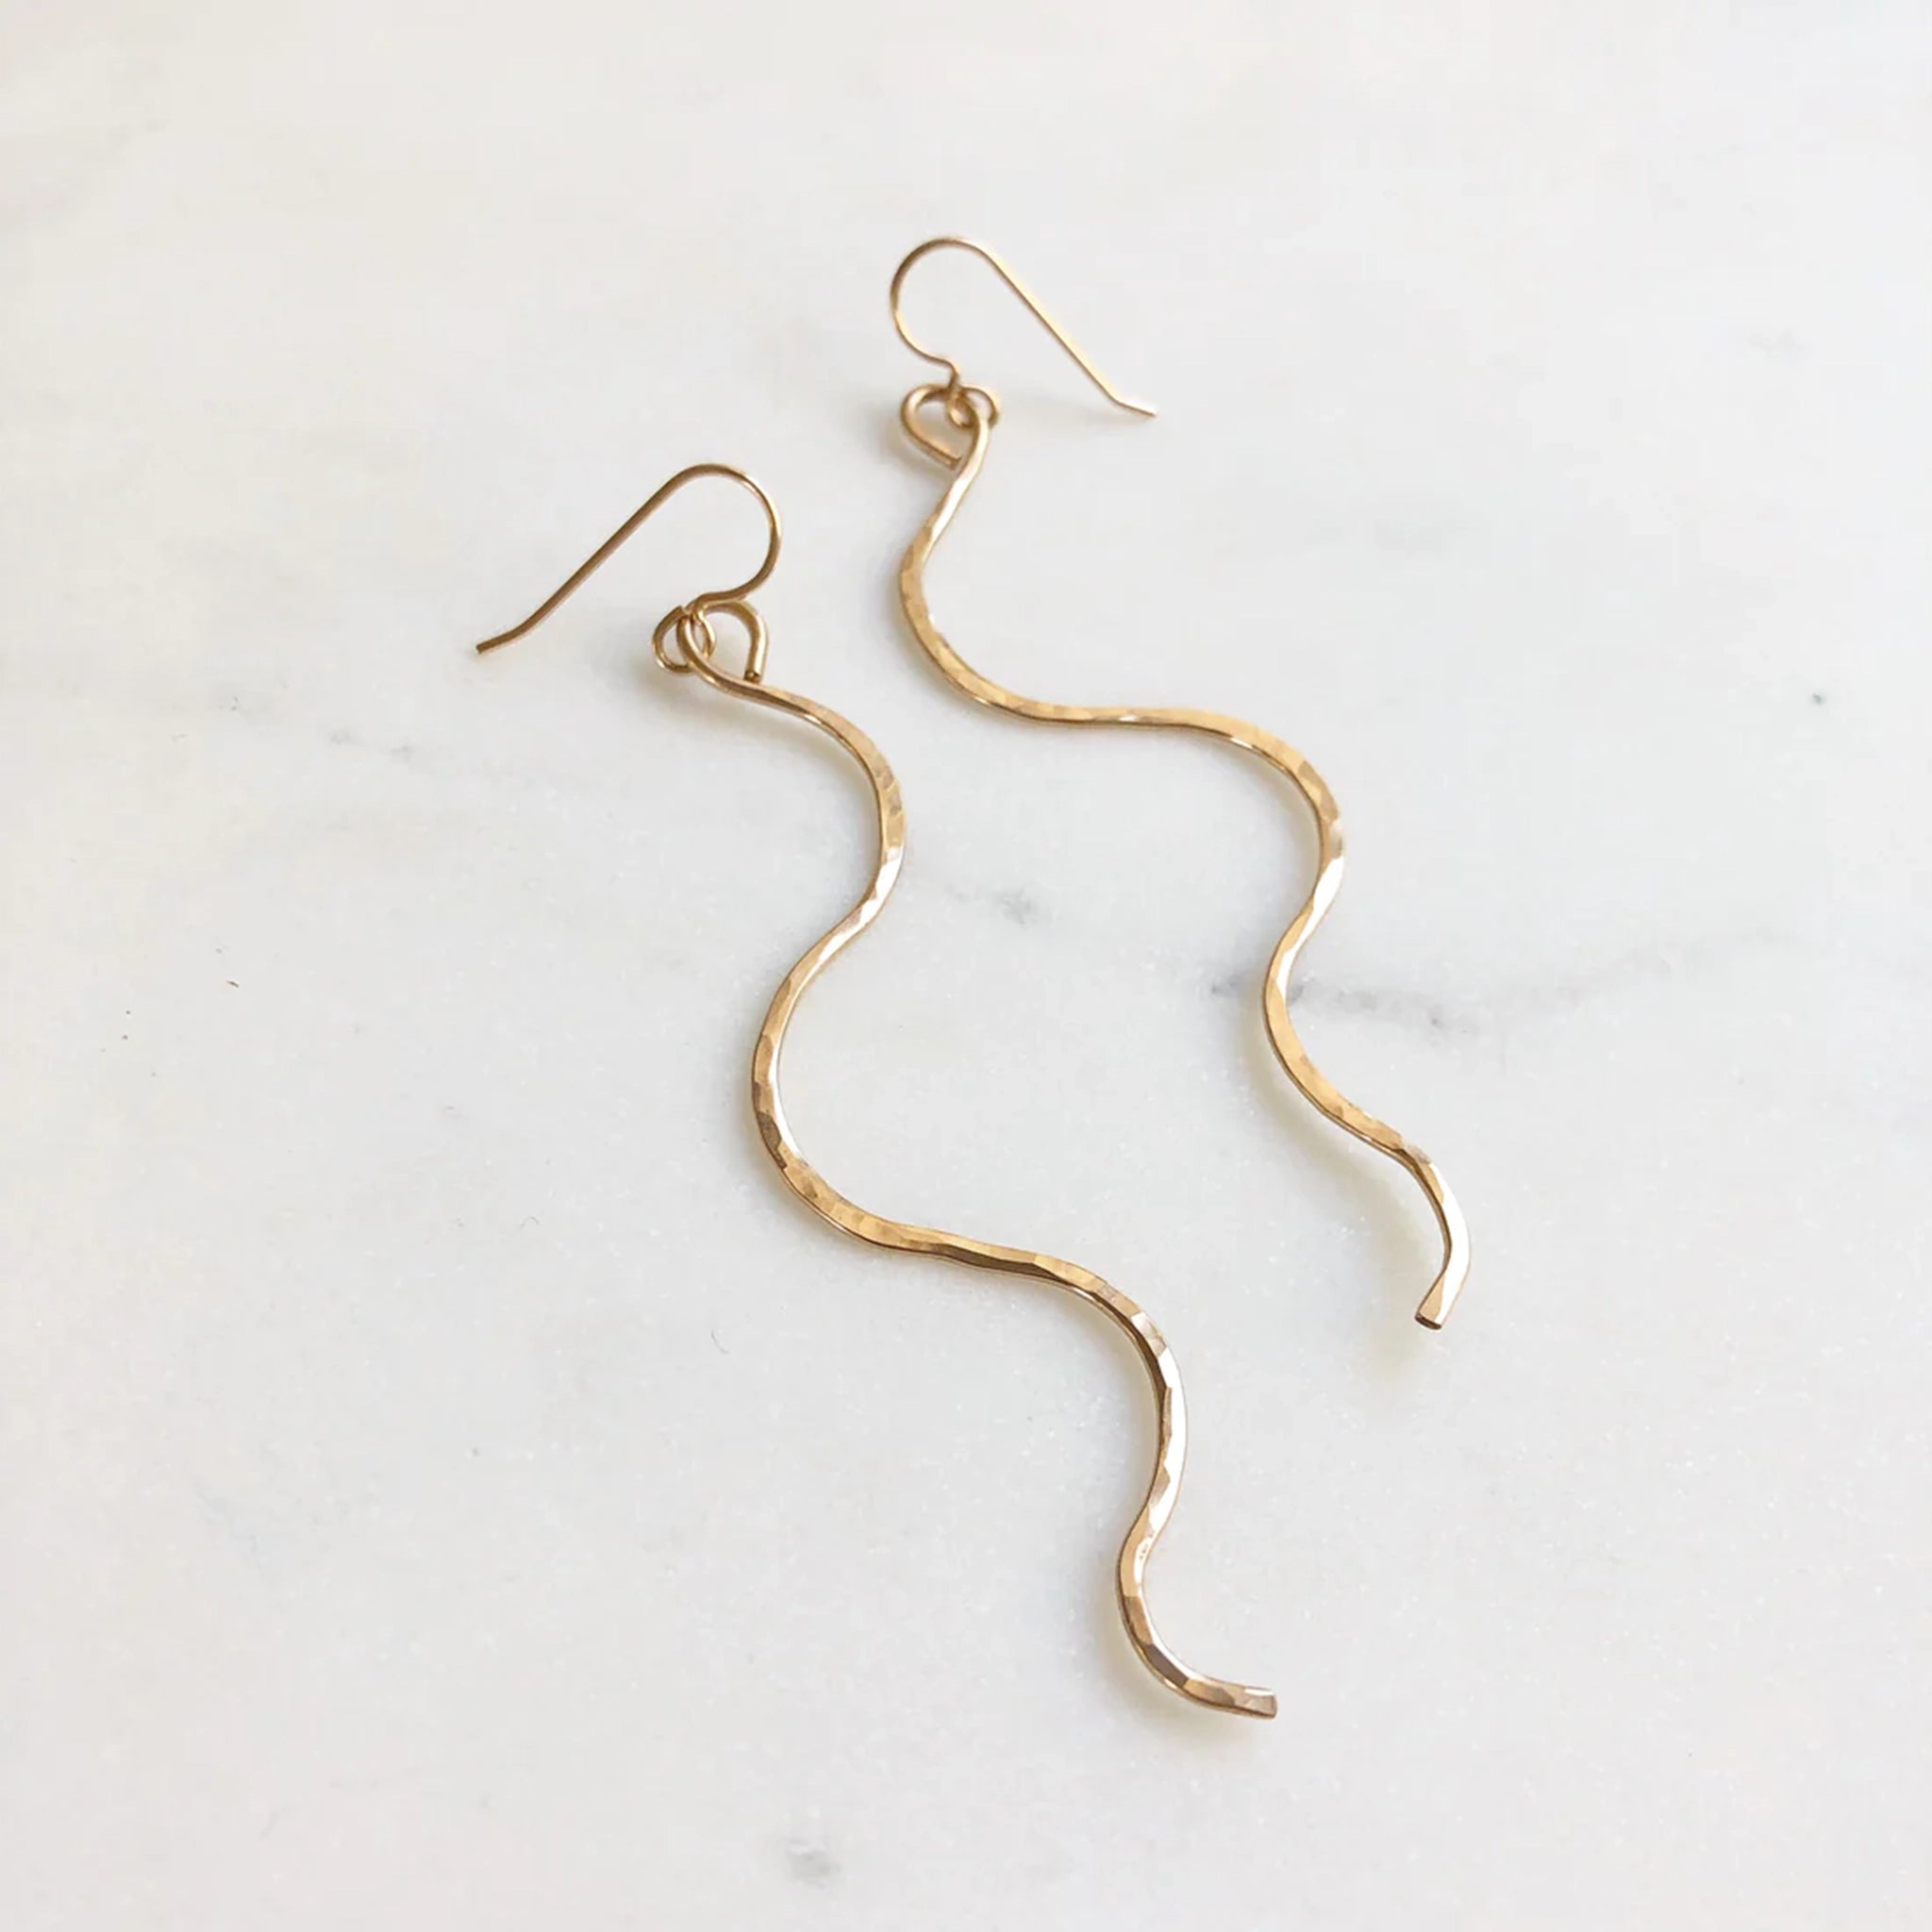 Two thin gold dangle earrings in a wavy "serpent like" shape with a hook earring back and a lightly hammered texture. 